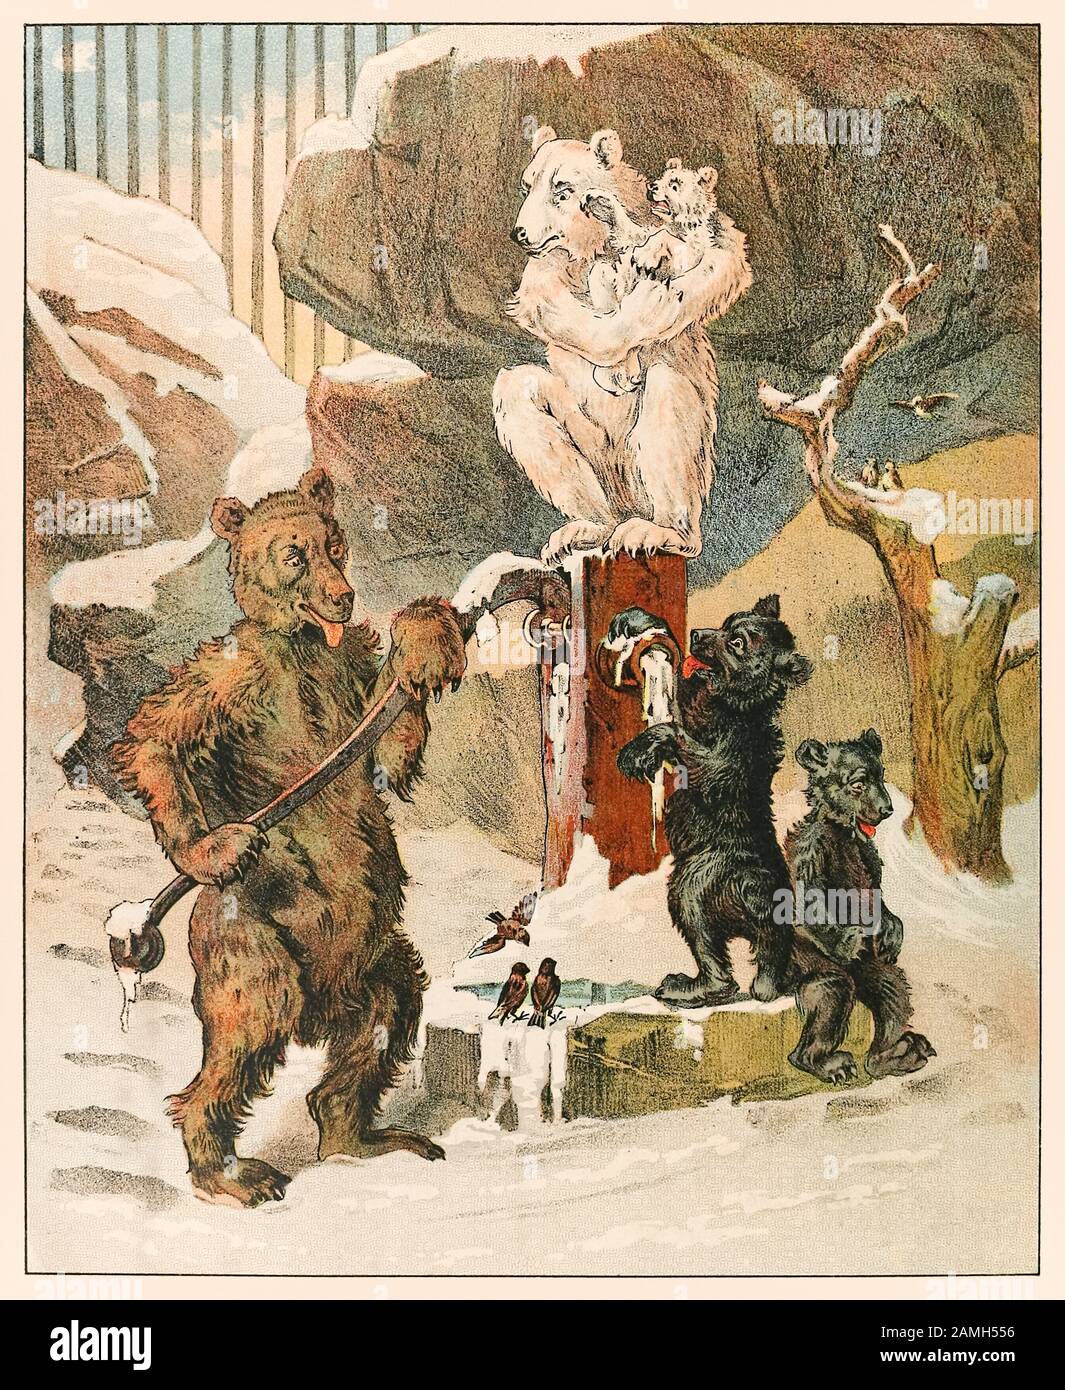 Bears (black, brown and polar) in a bear pit, from P.T. Barnum’s Menagerie published in 1888, illustration by Sarah J. Burke. Stock Photo